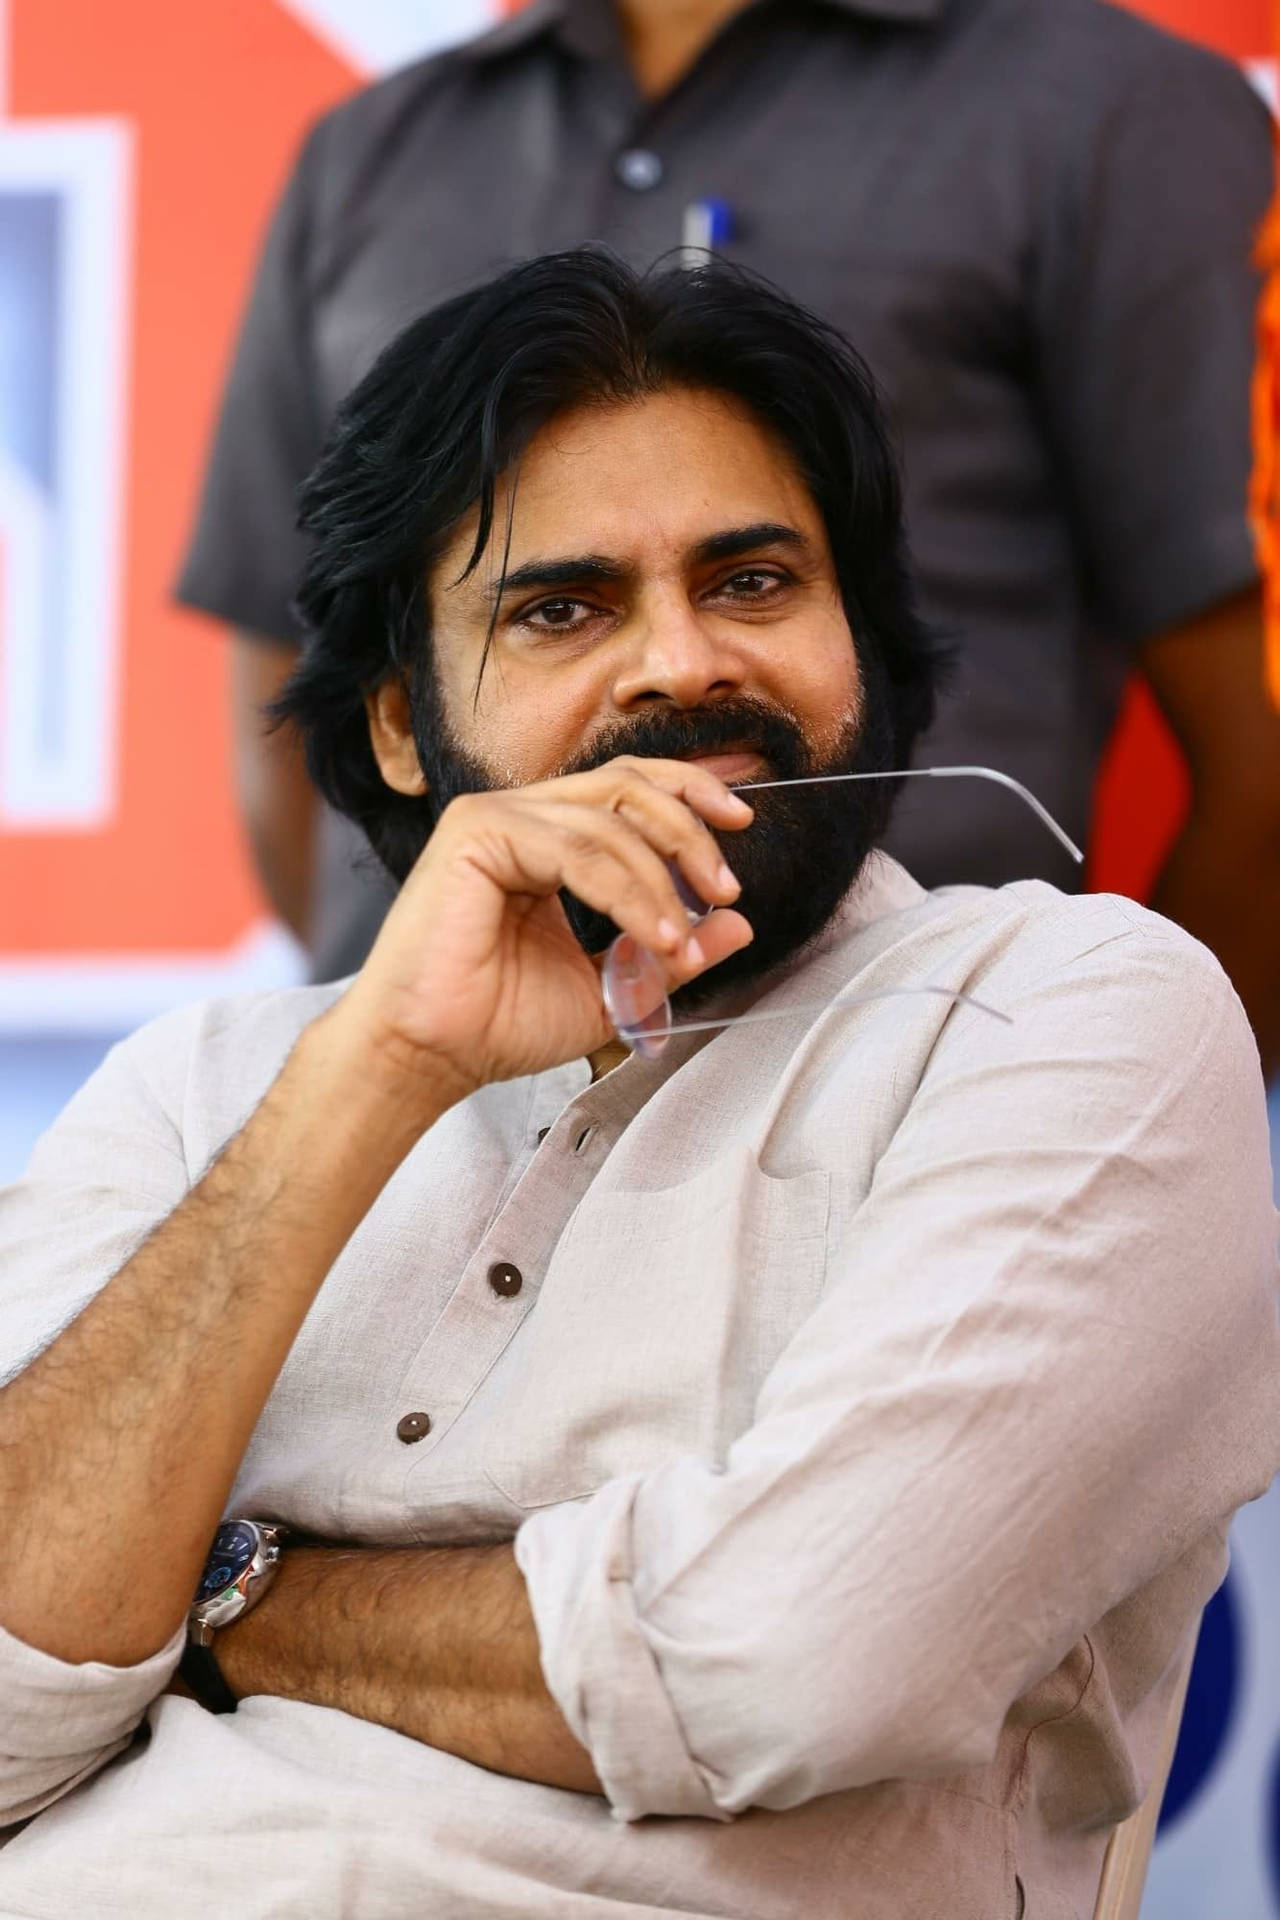 Pspk Pondering With Spectacles In Hand Background